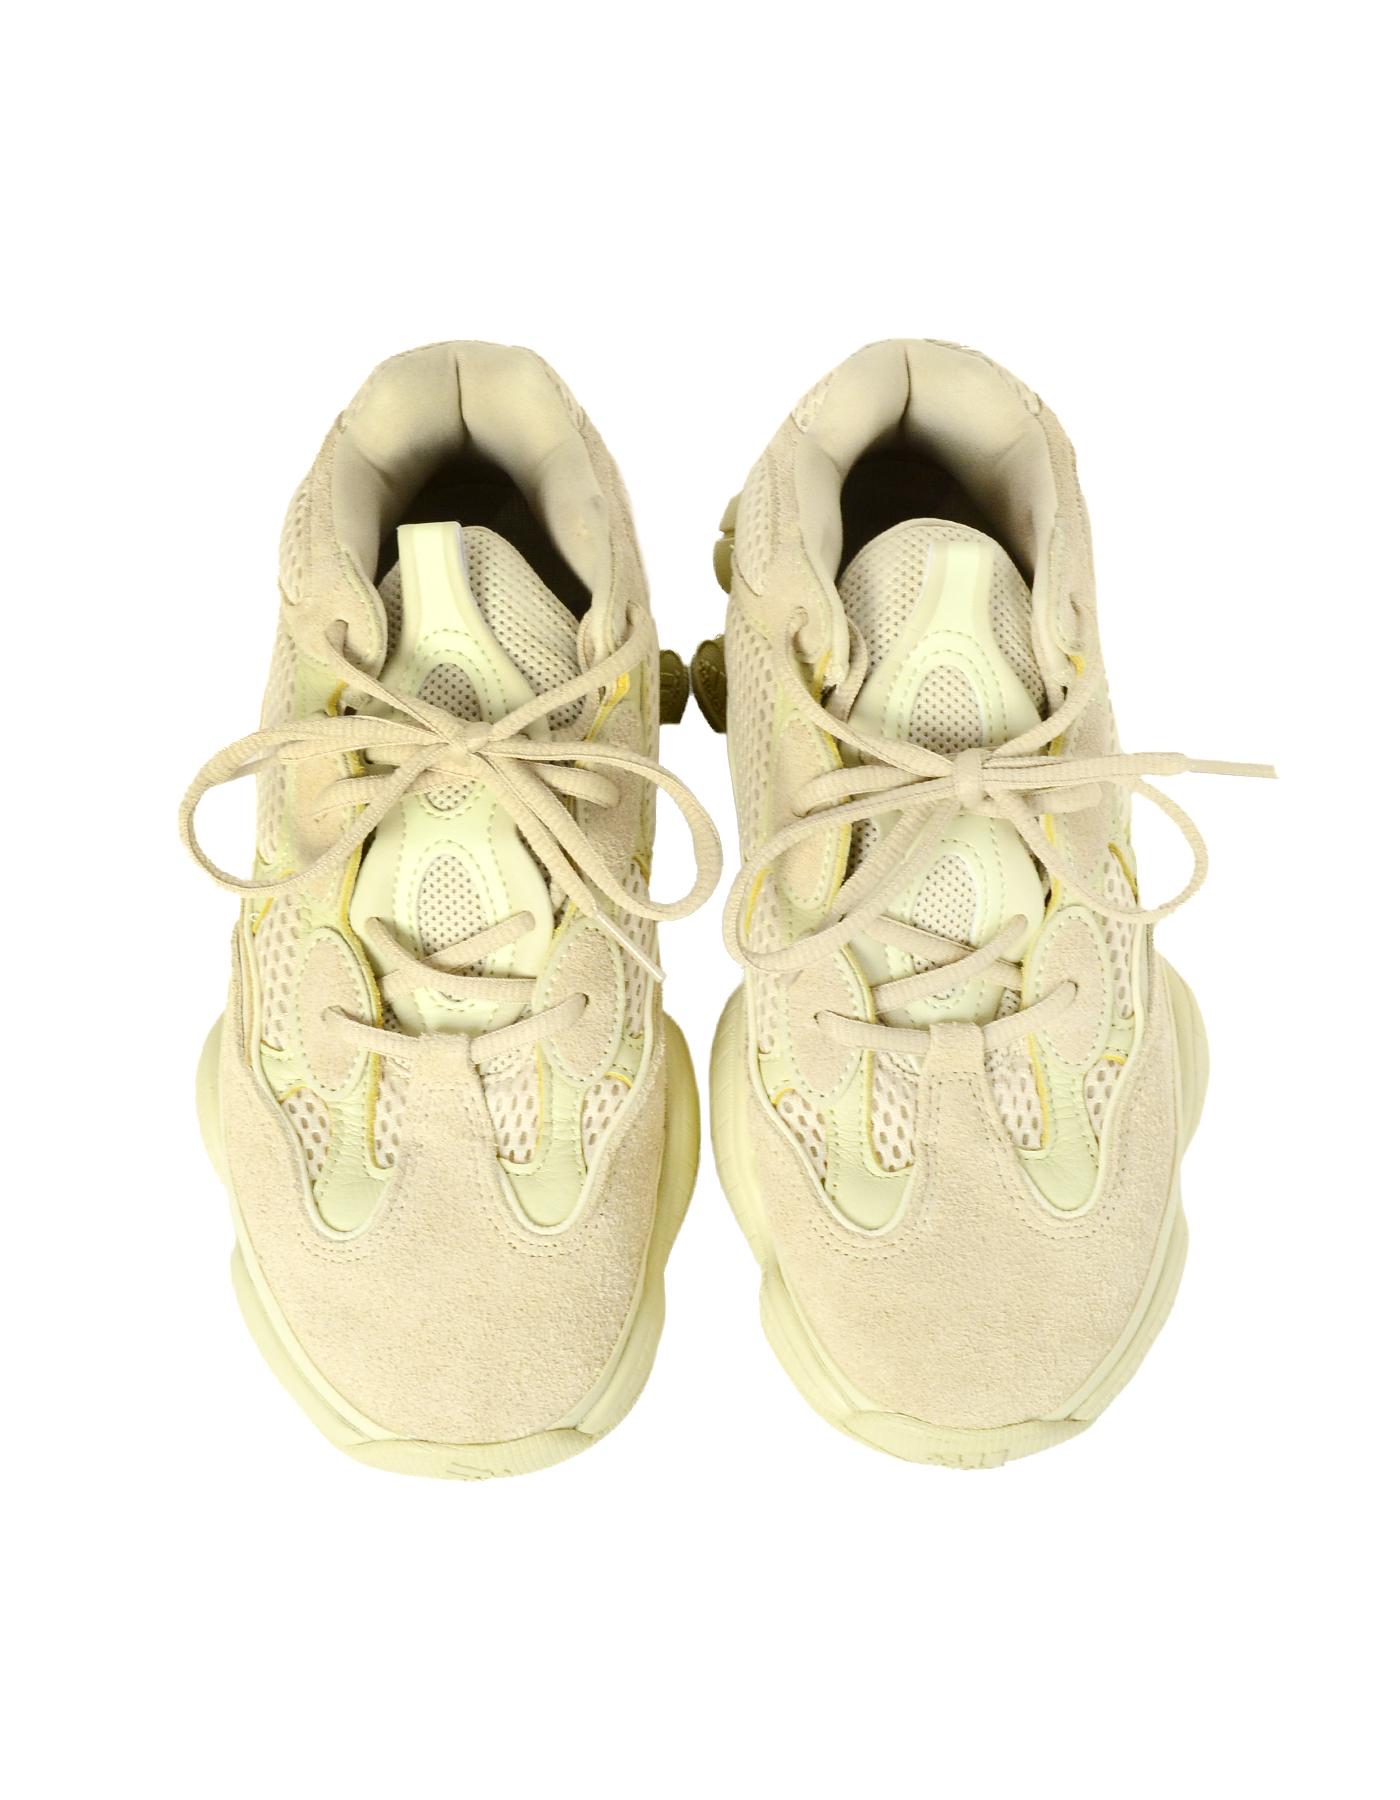 Adidas x Yeezy '18 500 Desert Rat Super Moon Yellow Tint Sneakers Sz M 7, W 8.5 In Excellent Condition In New York, NY